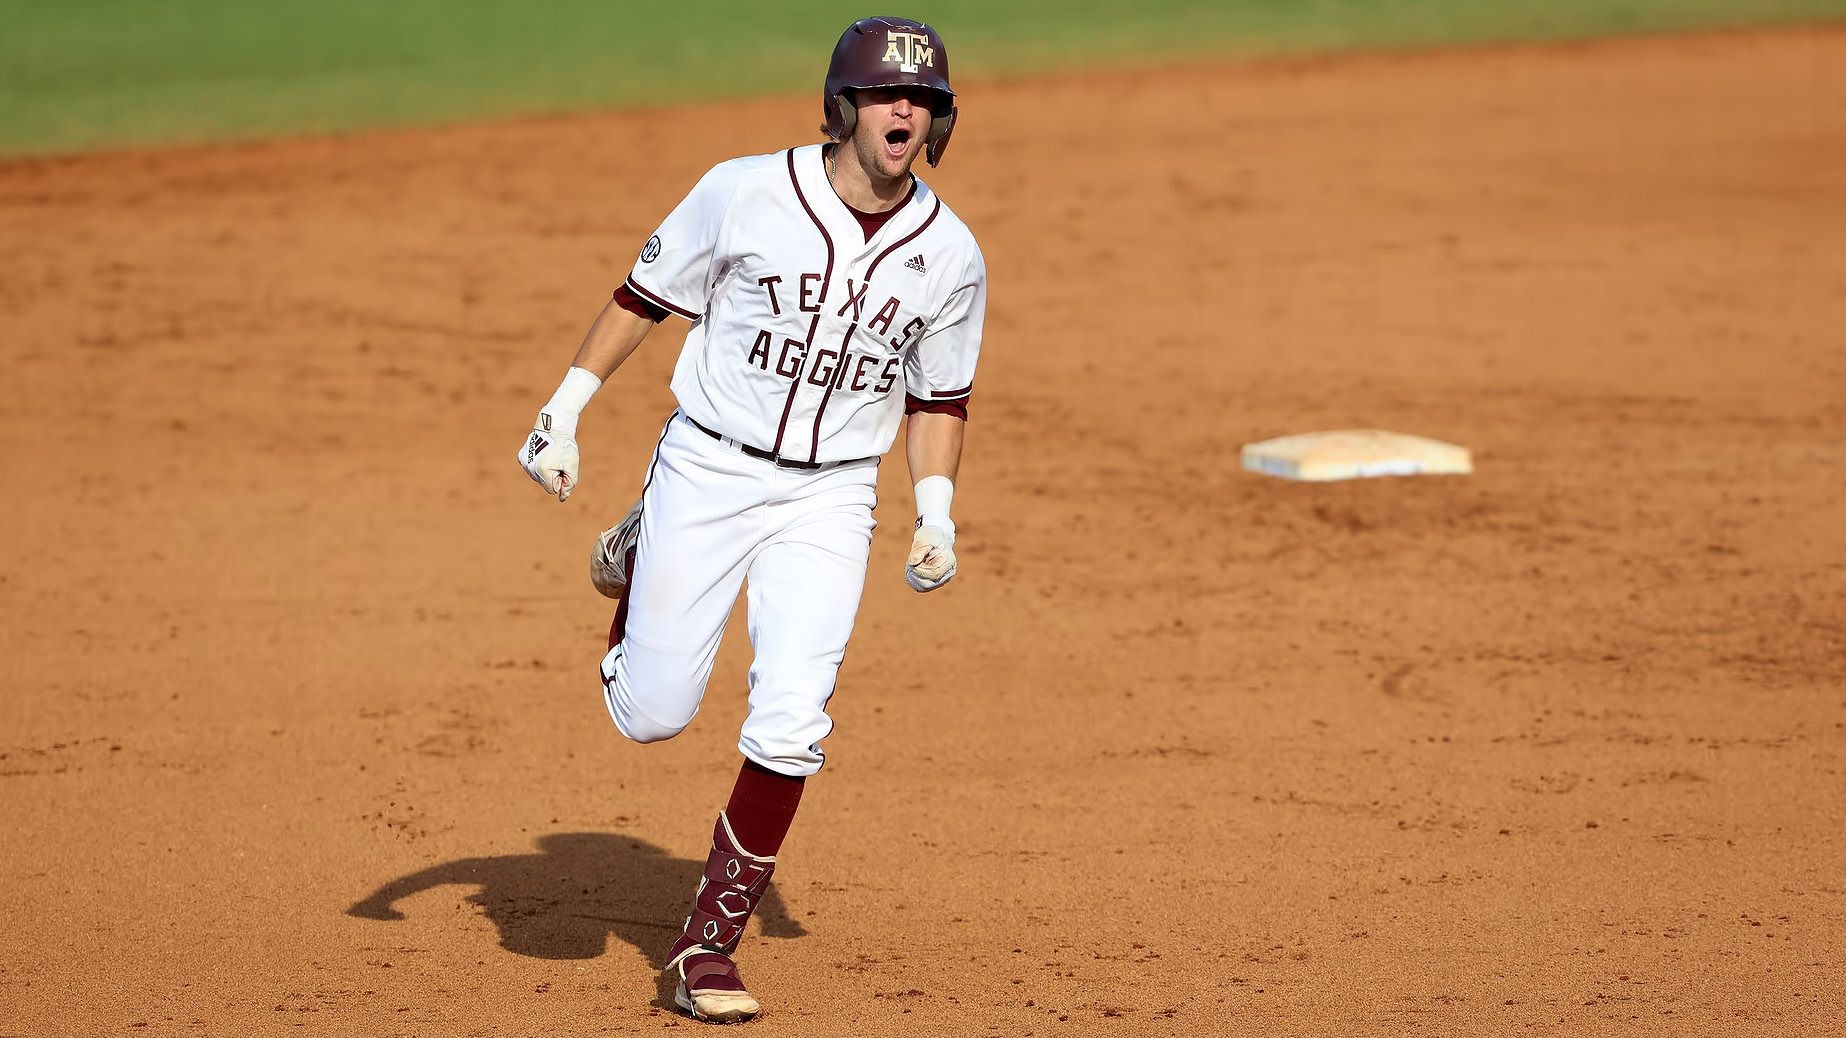 Hass' homer sends Aggies past LSU, to SEC tourney semis